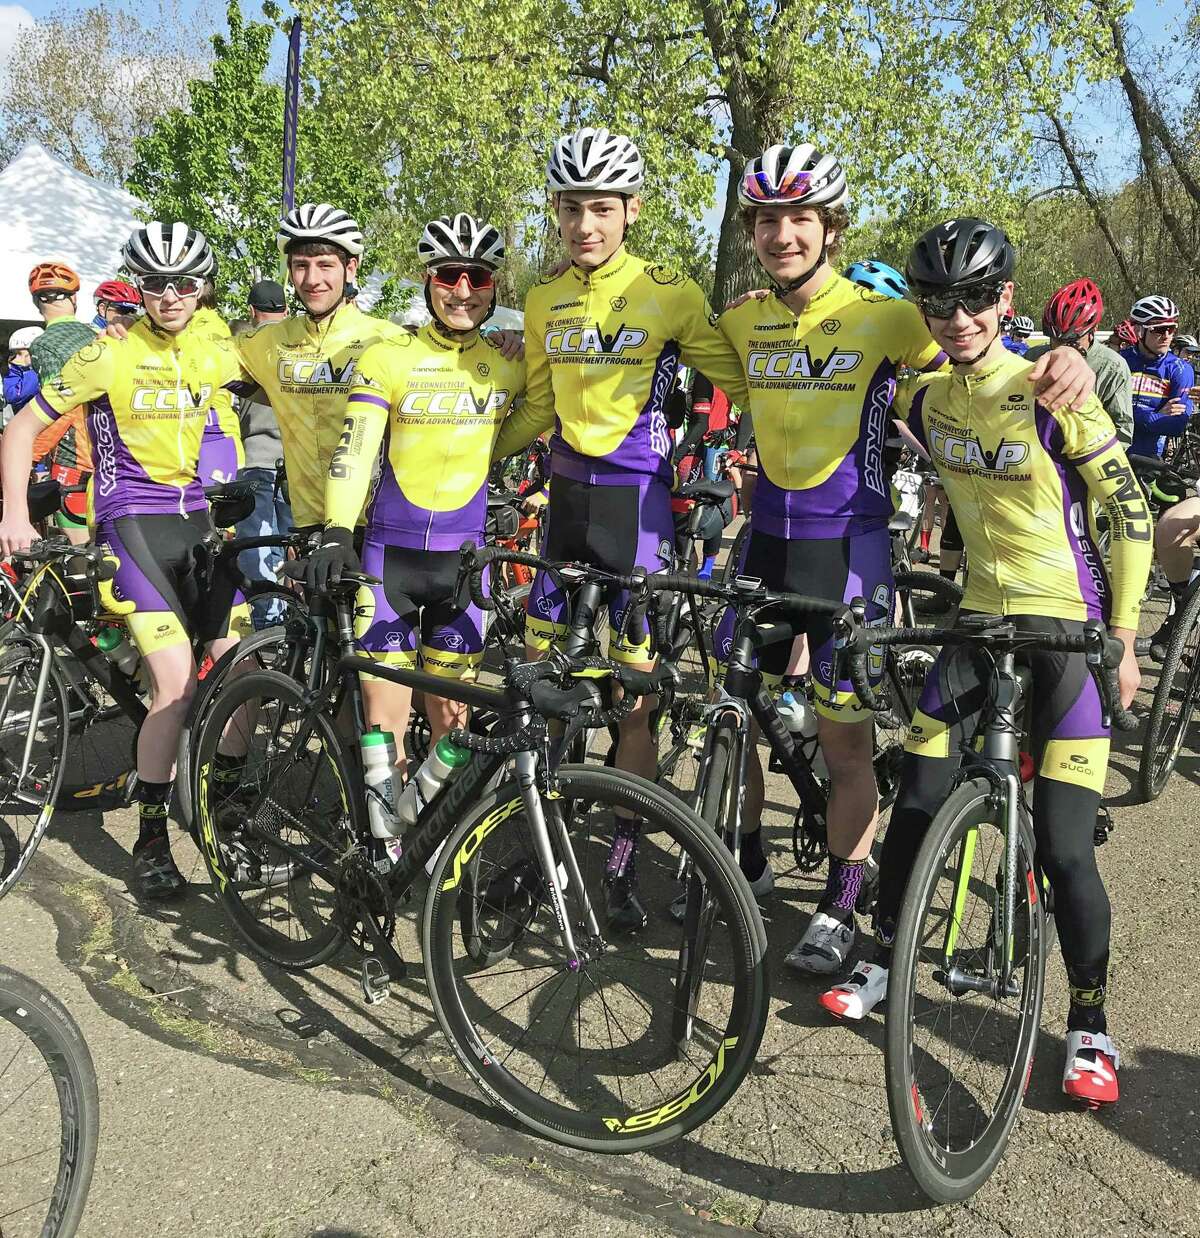 A group of junior riders rode May 11 in memory of CT Cycling Advancement Program executive director David Hoyle, who died in a biking accident April 1 at Wadsworth Falls in Middletown. Funds raised will continue to support youth and school cycling in Connecticut.